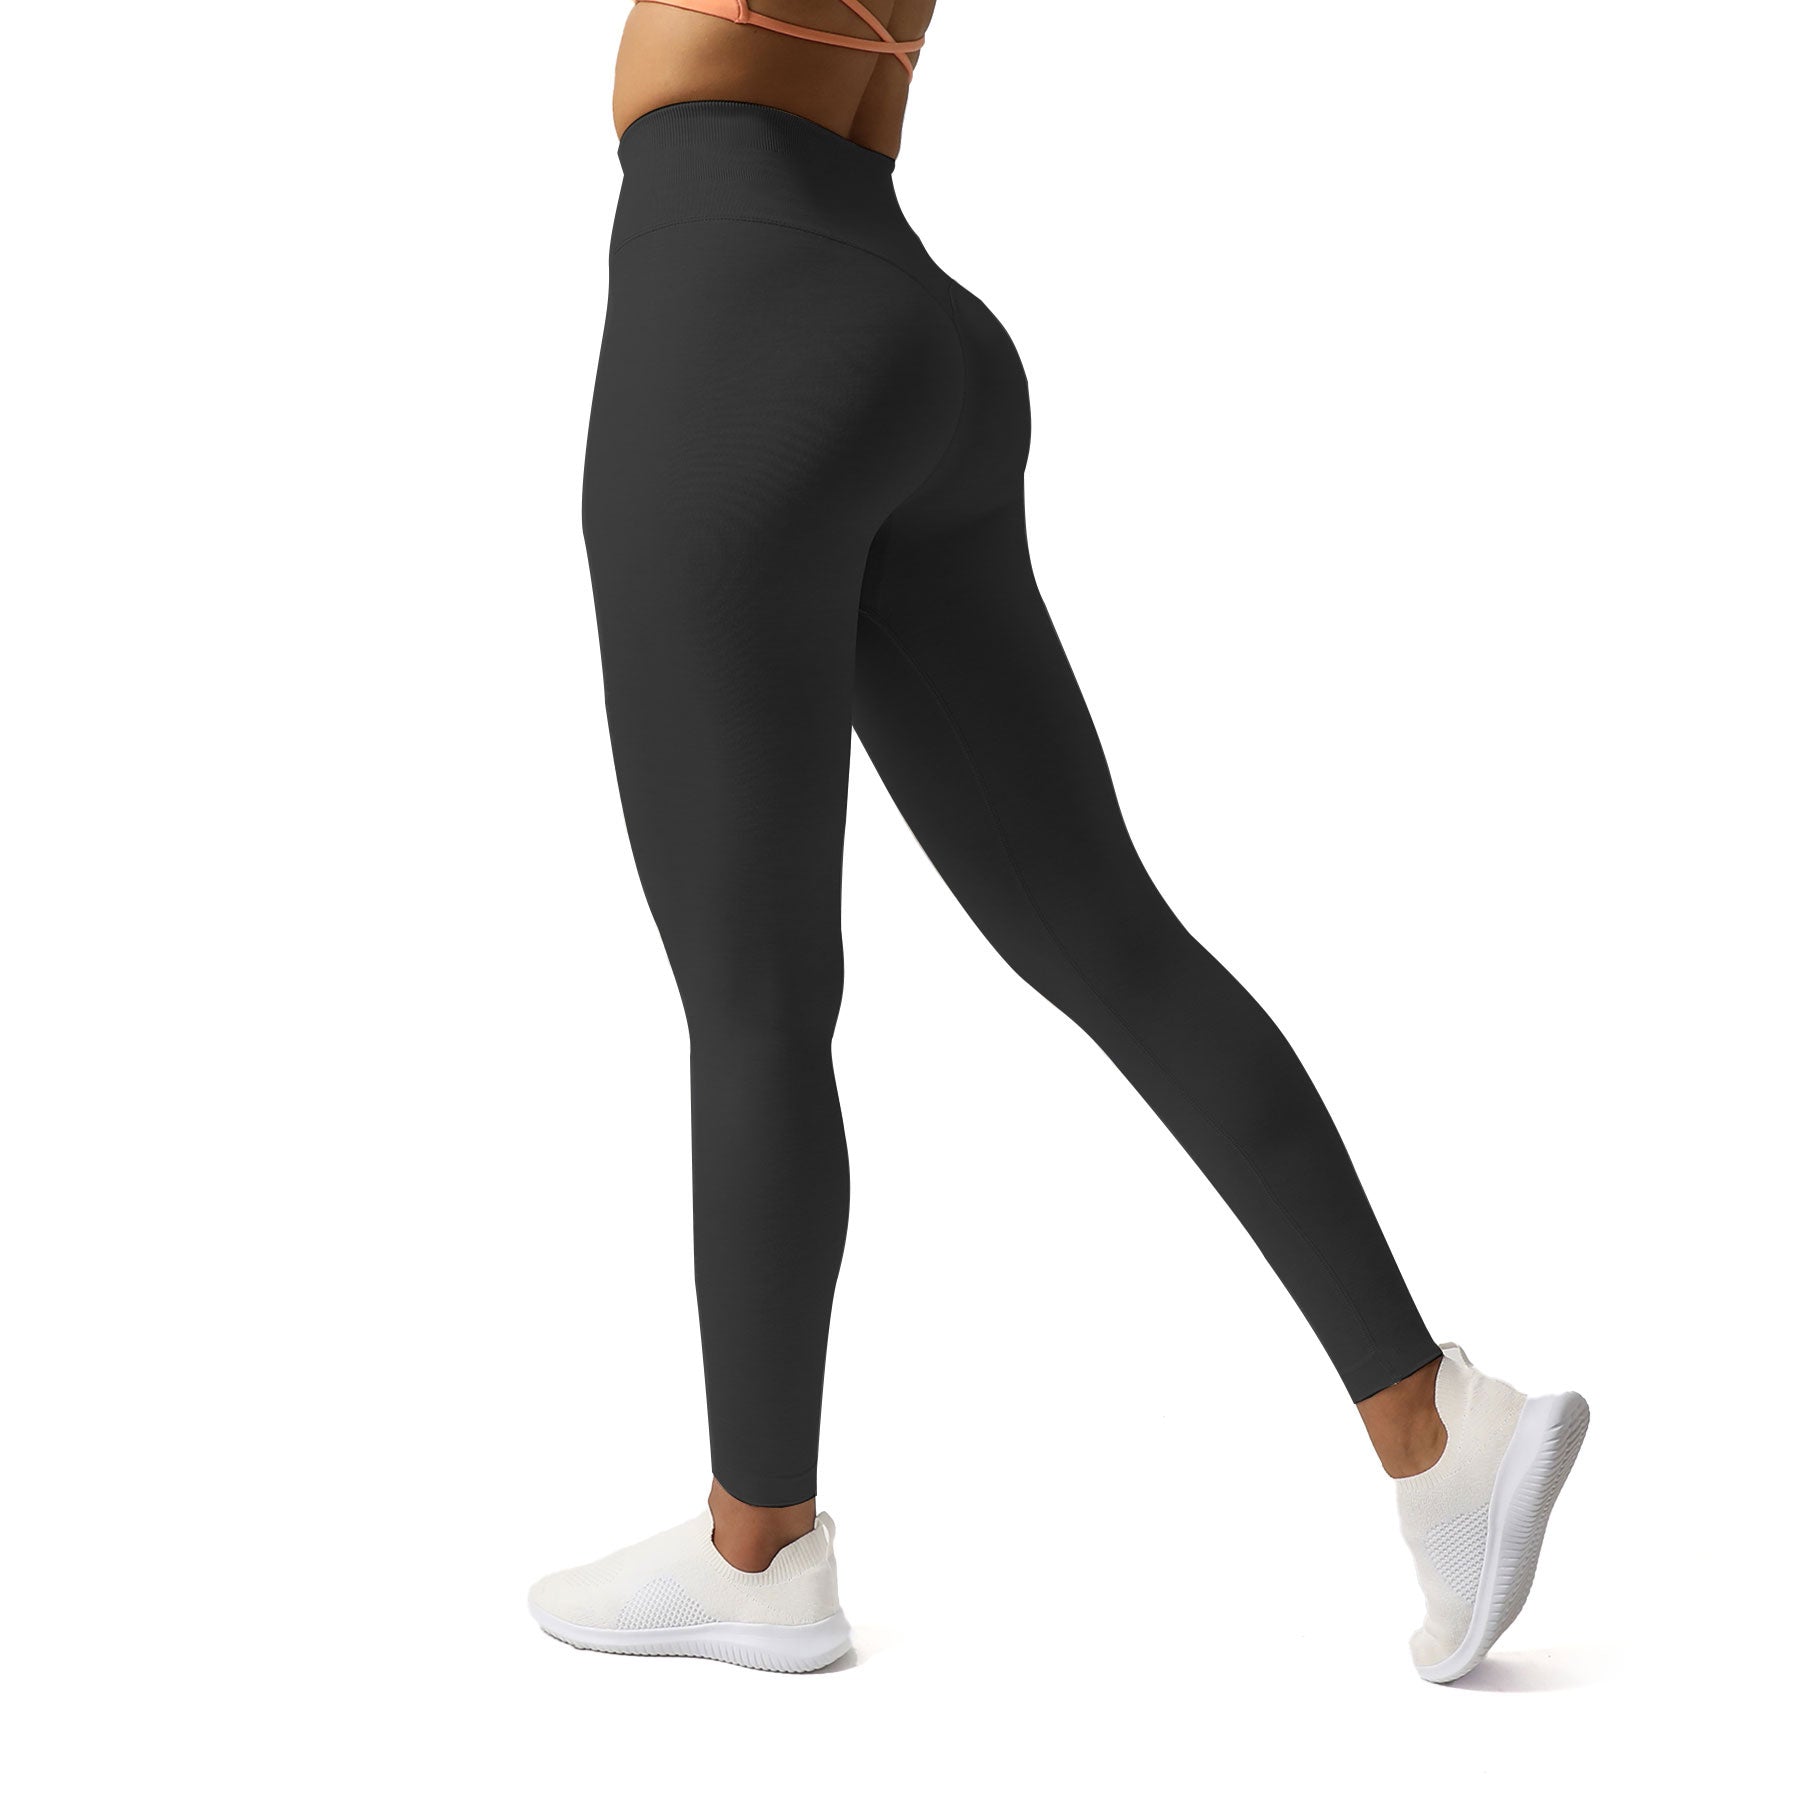 Aoxjox seamless leggings, Electric blue marl (S) and Aoxjox black